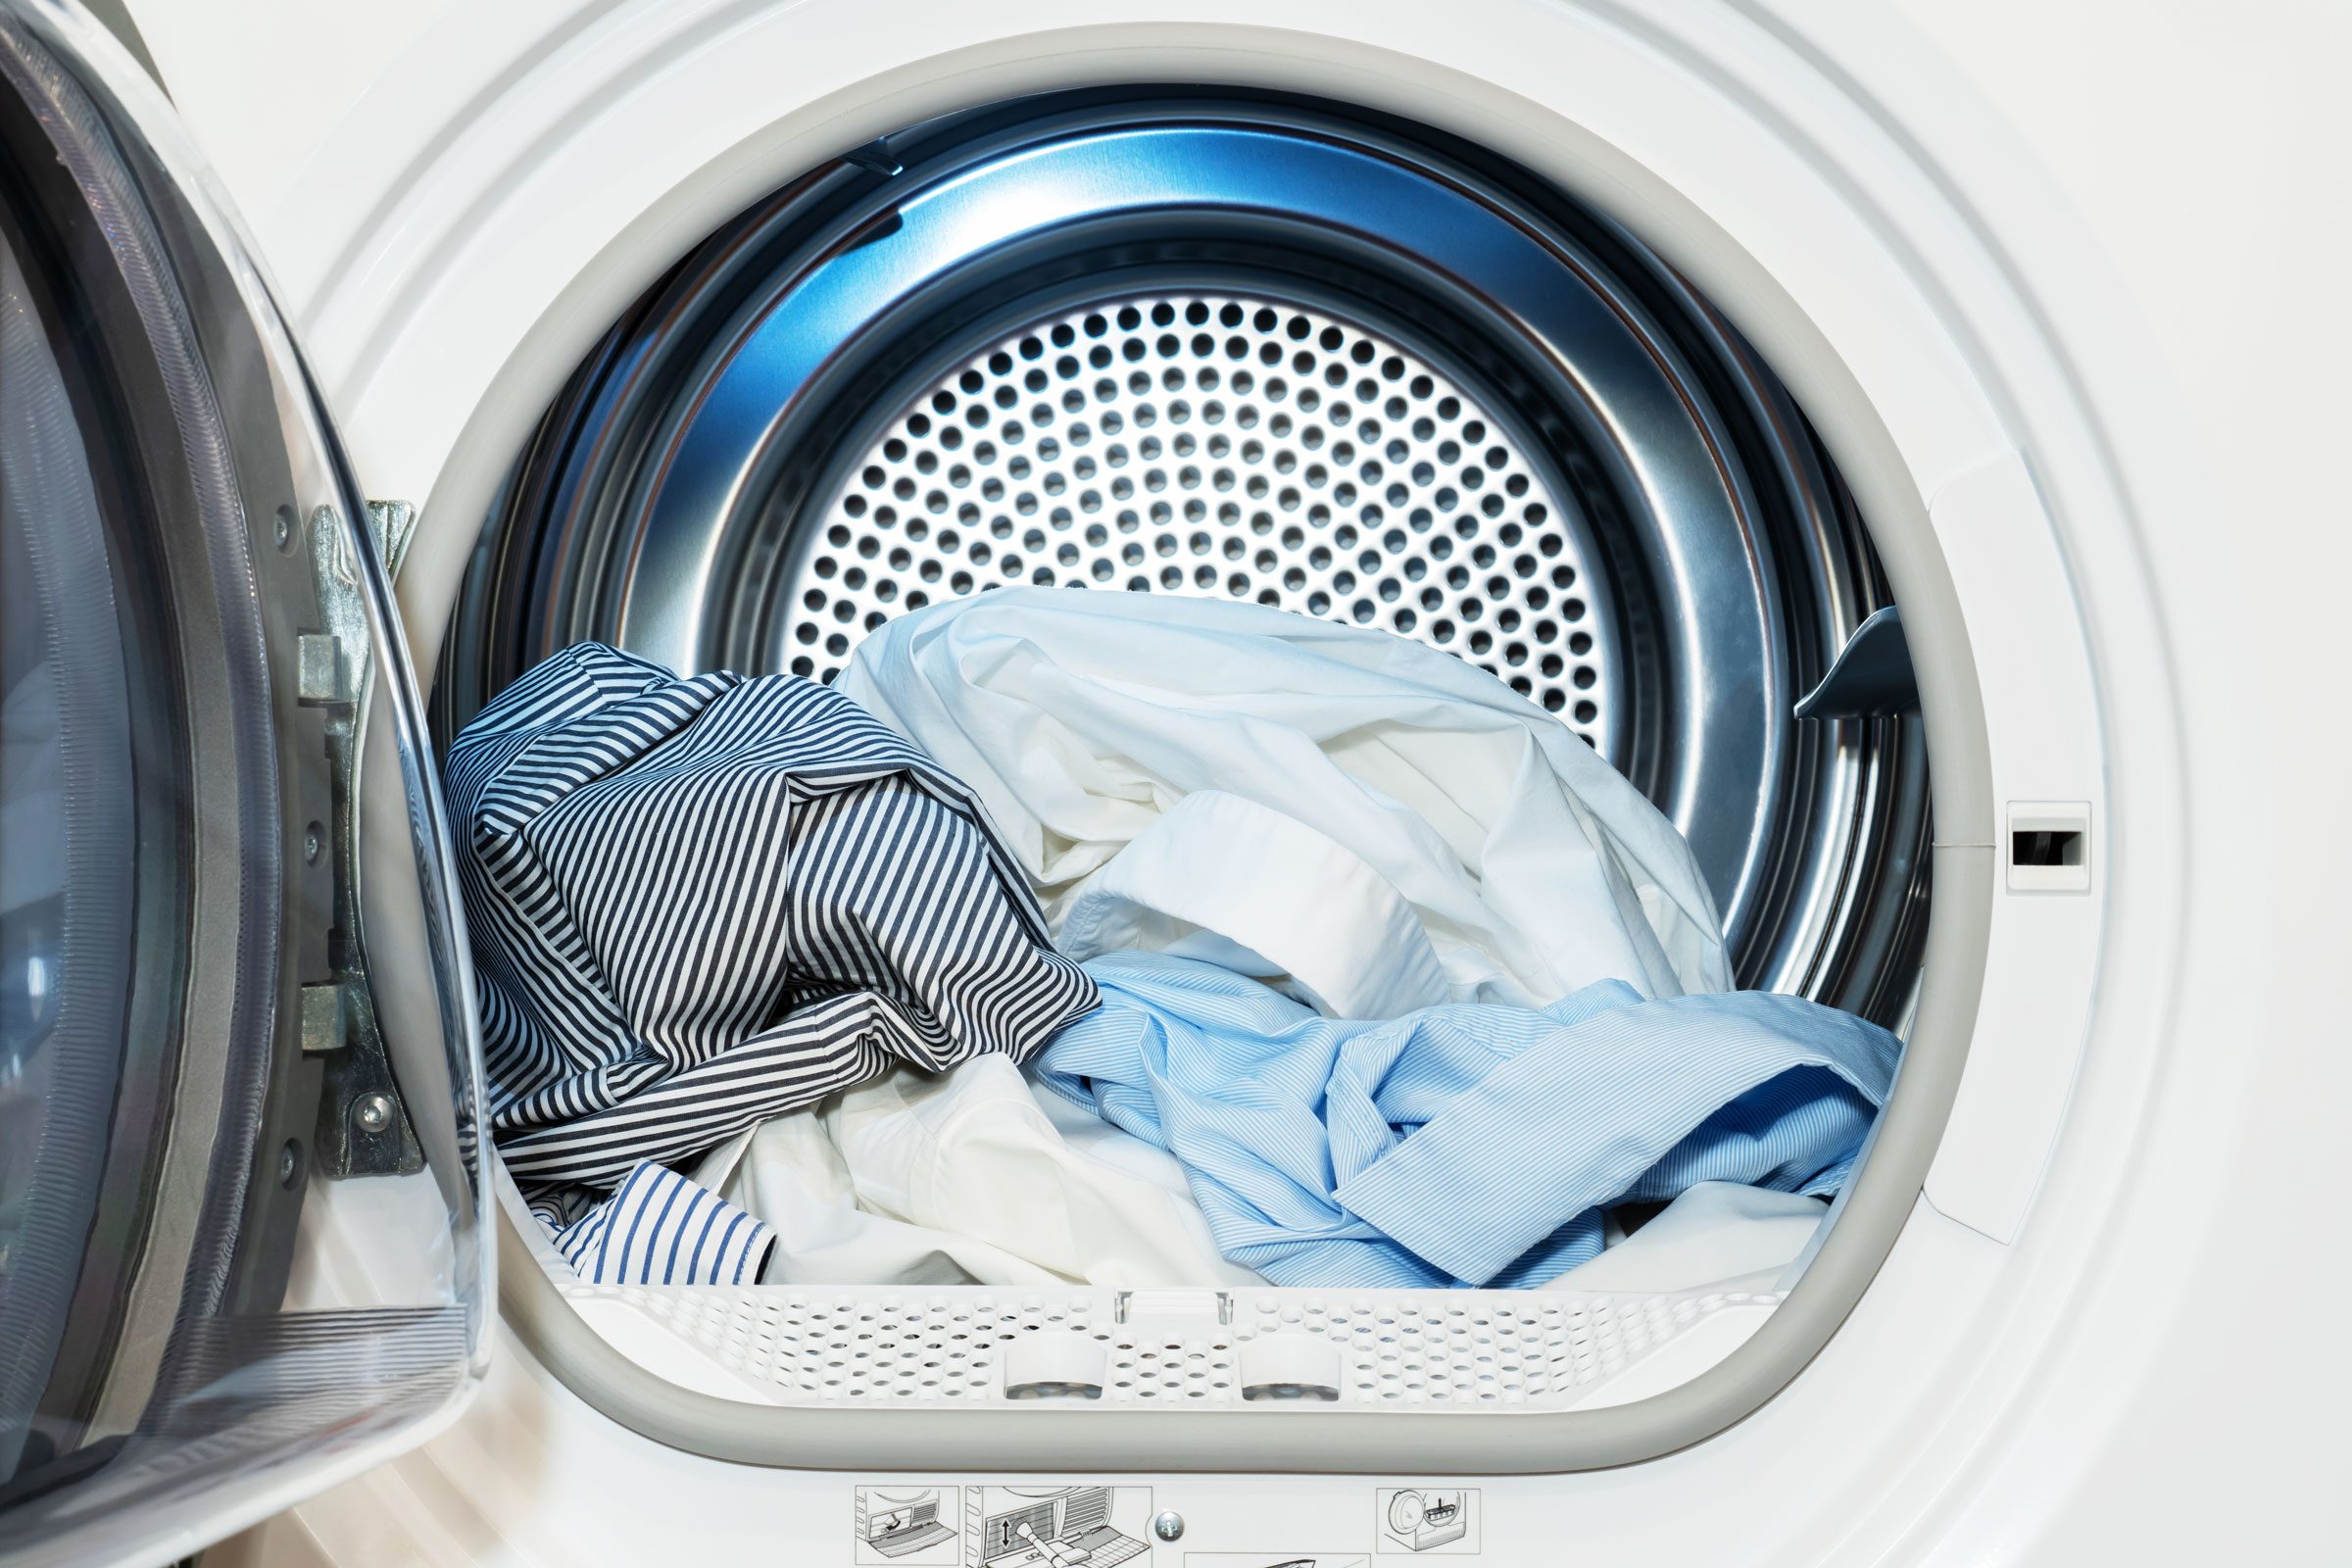 Air Drying vs Dryer Drying Your Undies - Candis